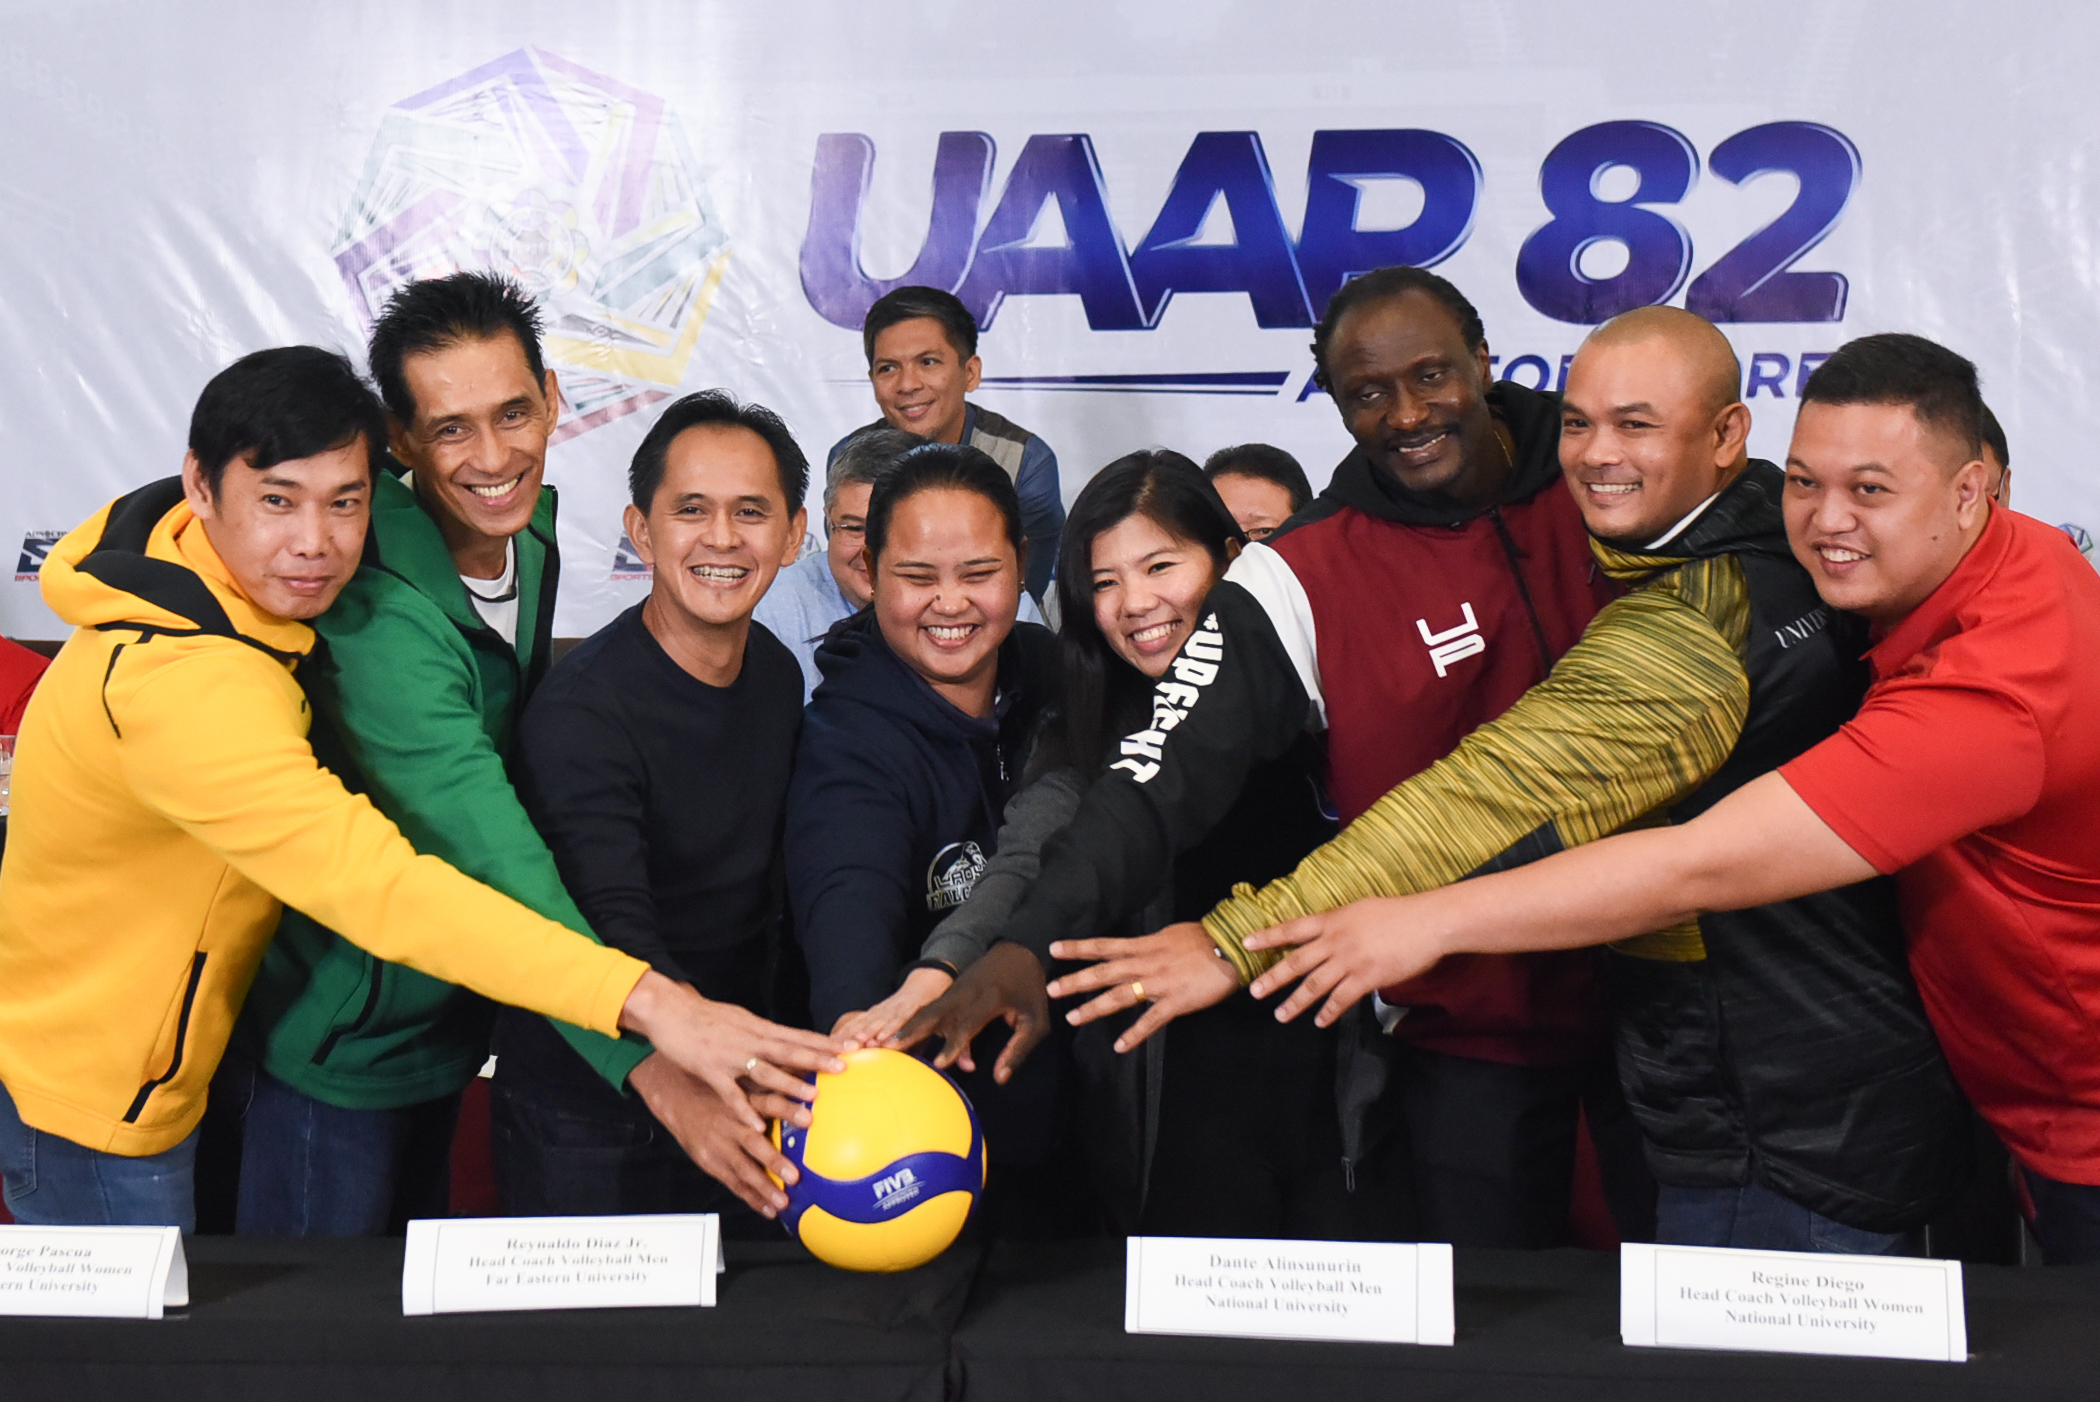 UAAP Volleyball unveils video challenge system for Season 82